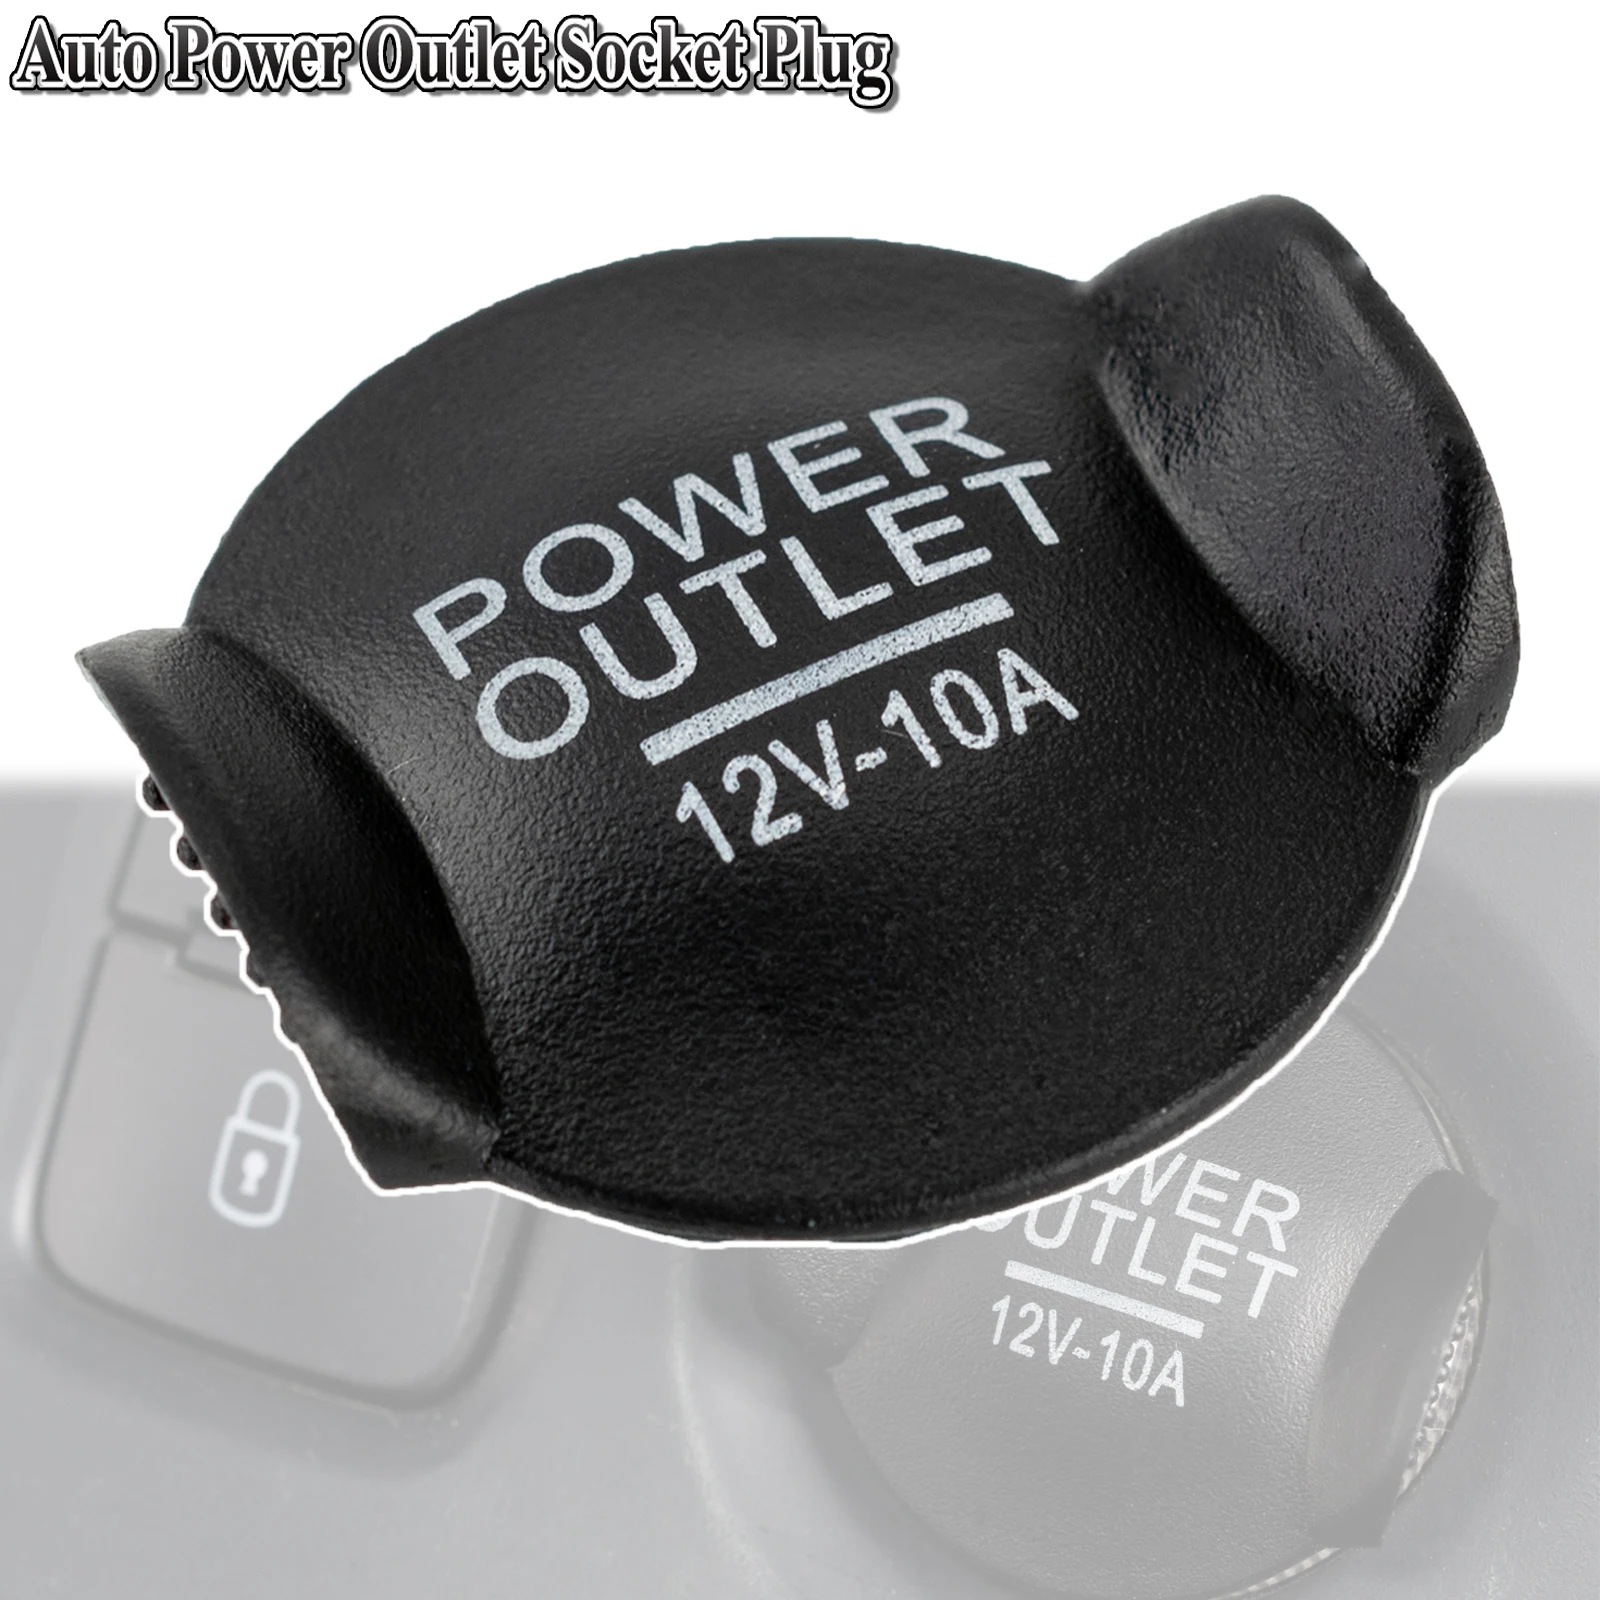 

1pc Universal Power Socket Plug Outlet Cigarette Lighter Auto Cover Cap 21mm 22mm 12V Car Accessories Styling Waterproof